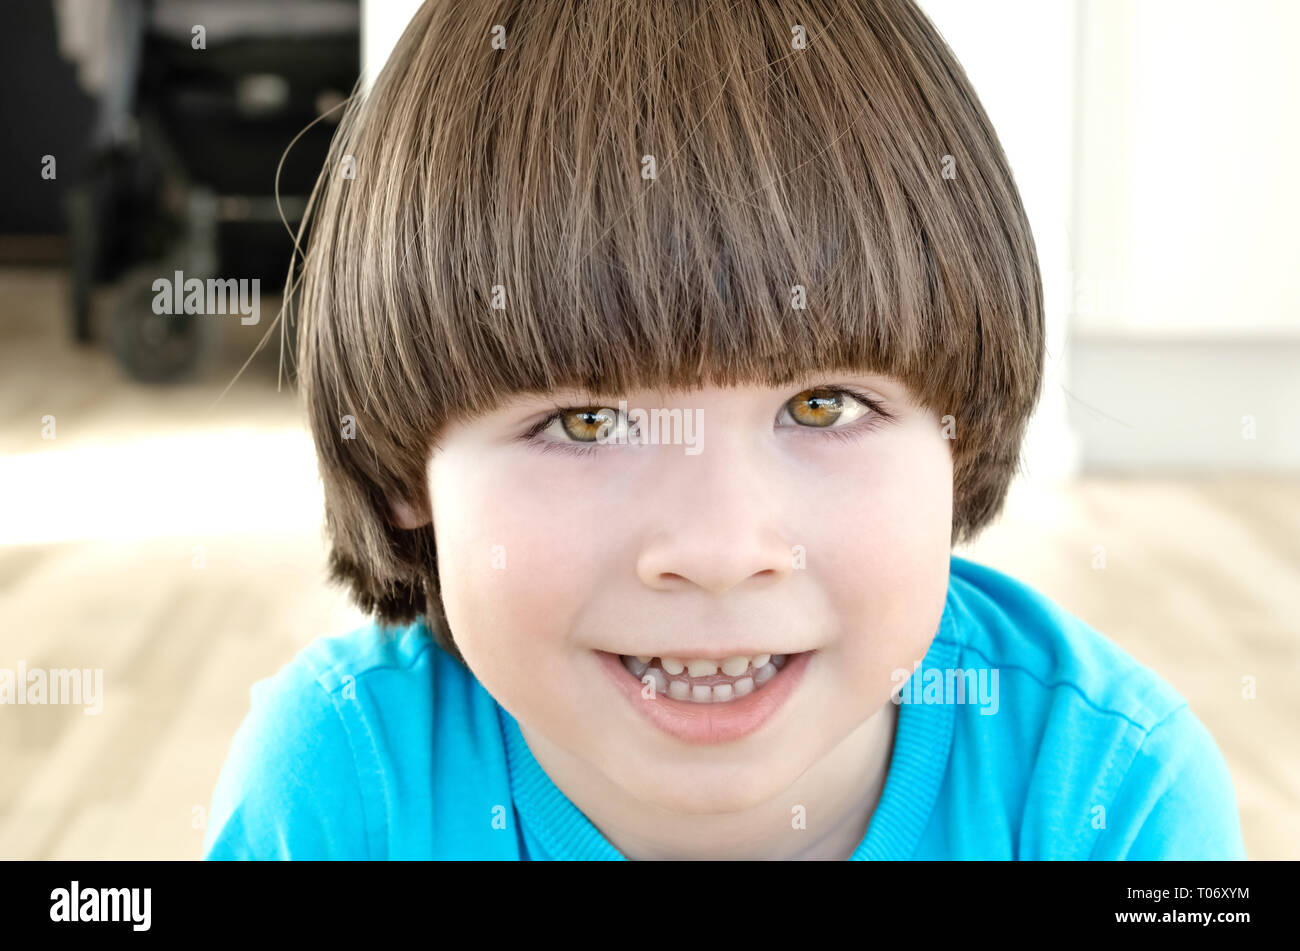 Small boy with long hair is smiling and looking to the camera Stock Photo